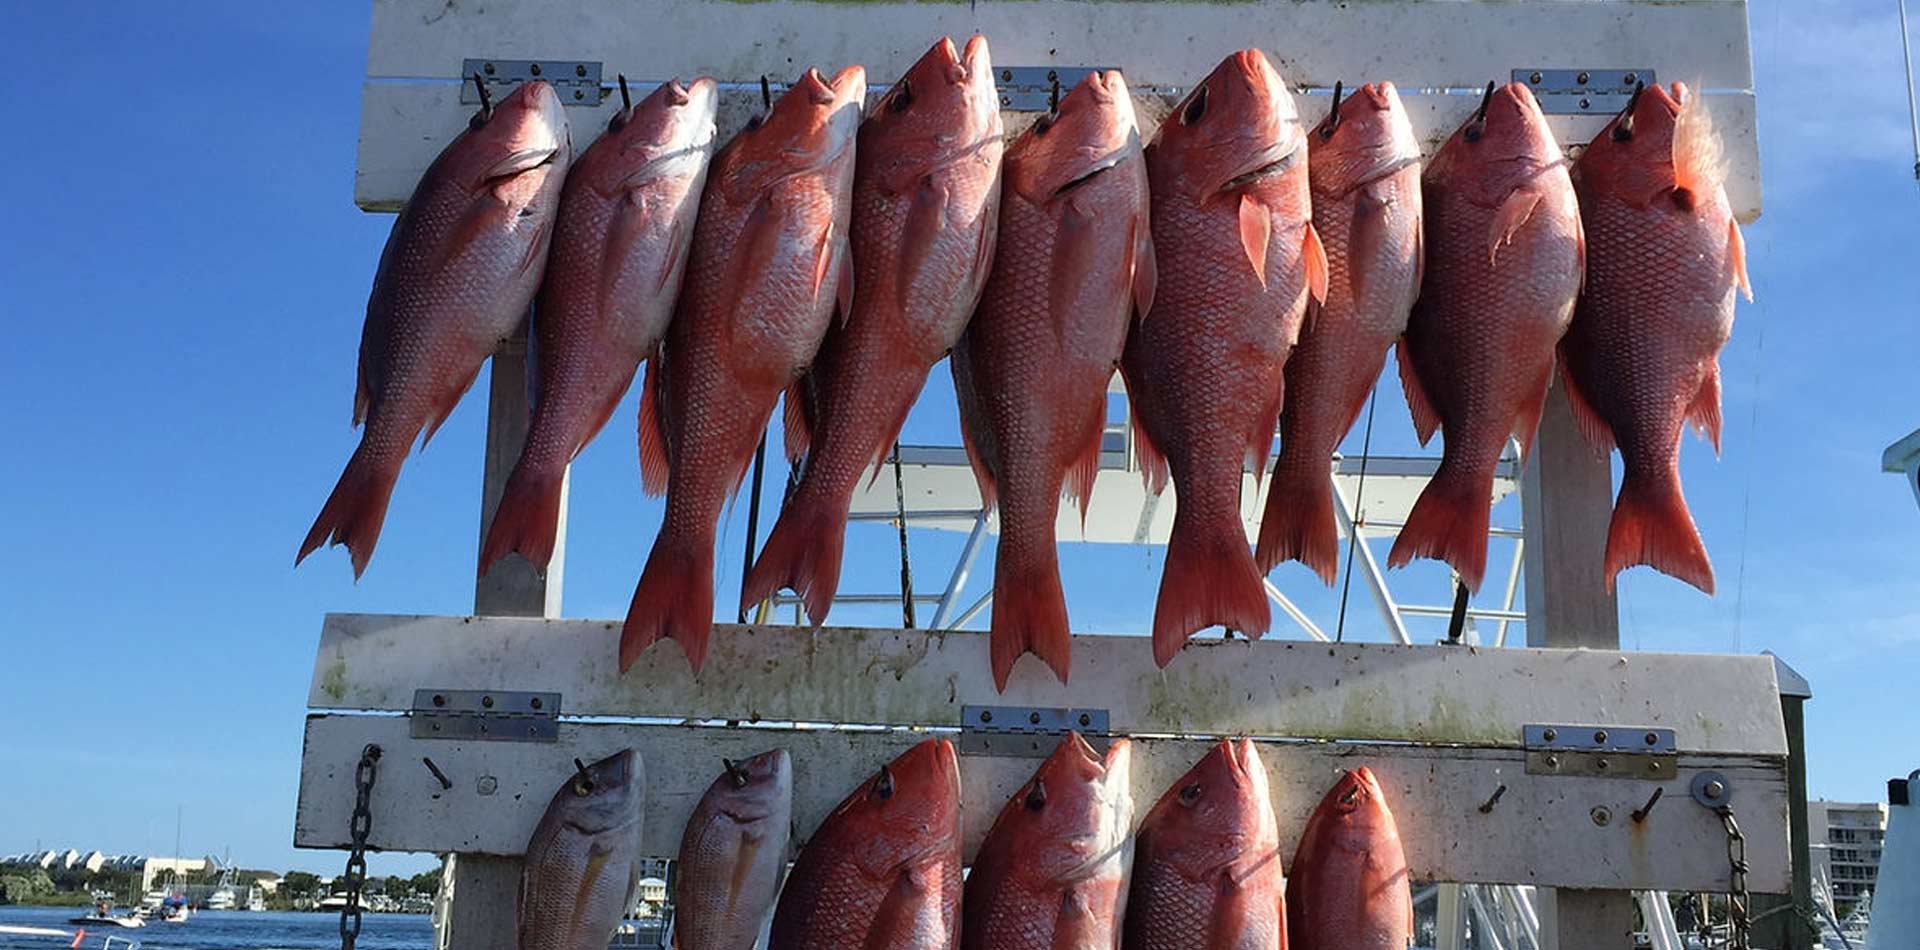 Red snapper caught on fishing expedition.